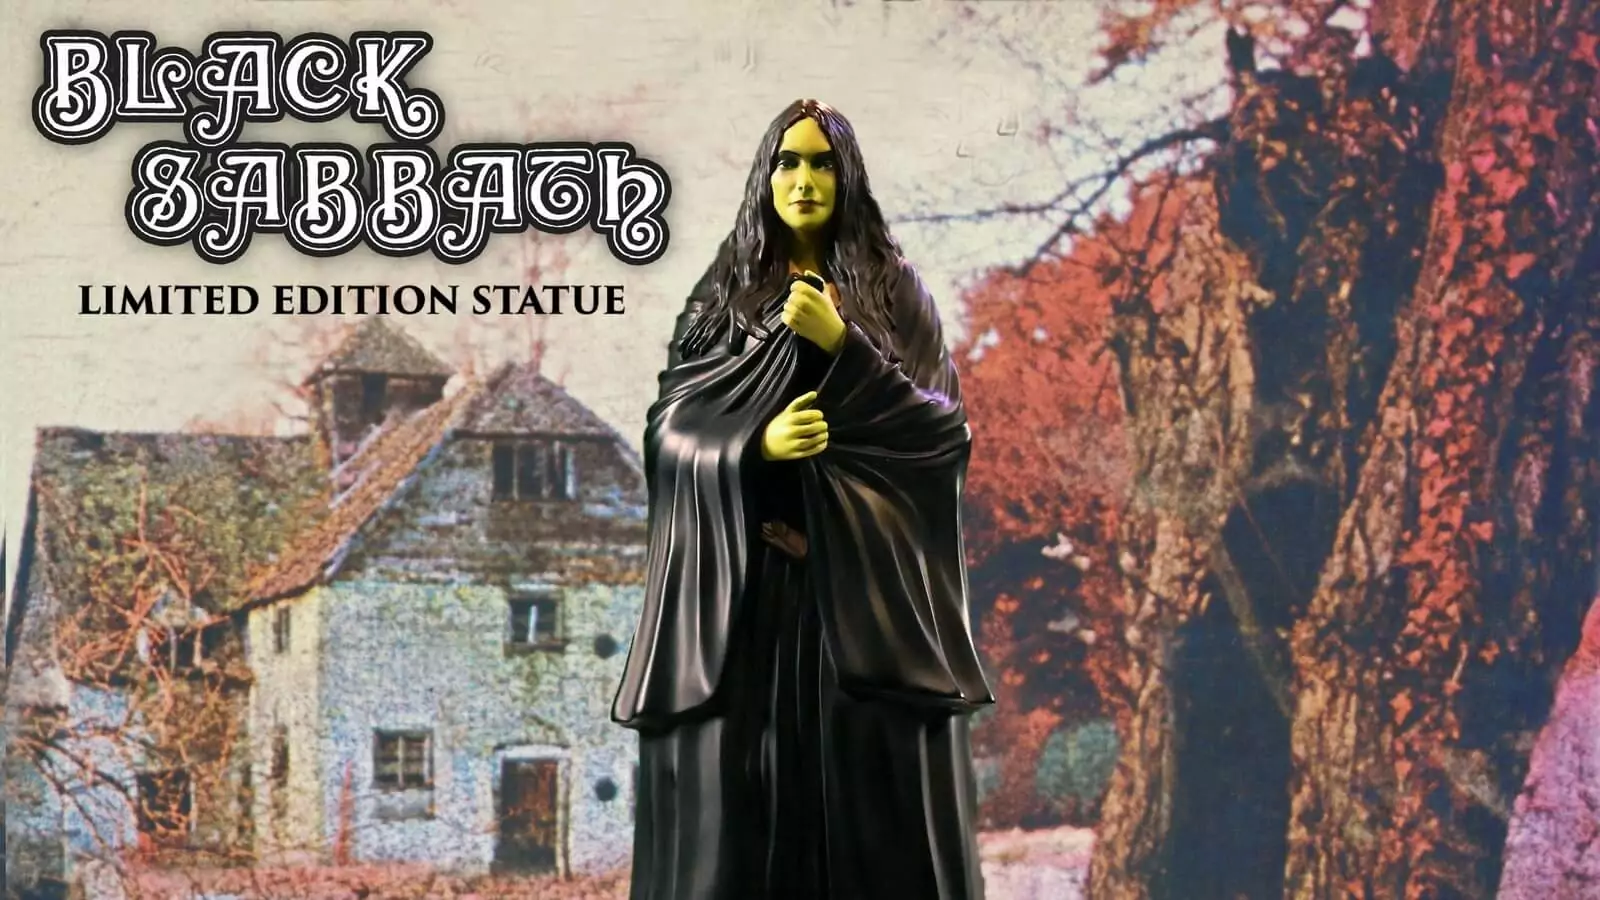 Black Sabbath Immortalizes Album Covers with New Statues